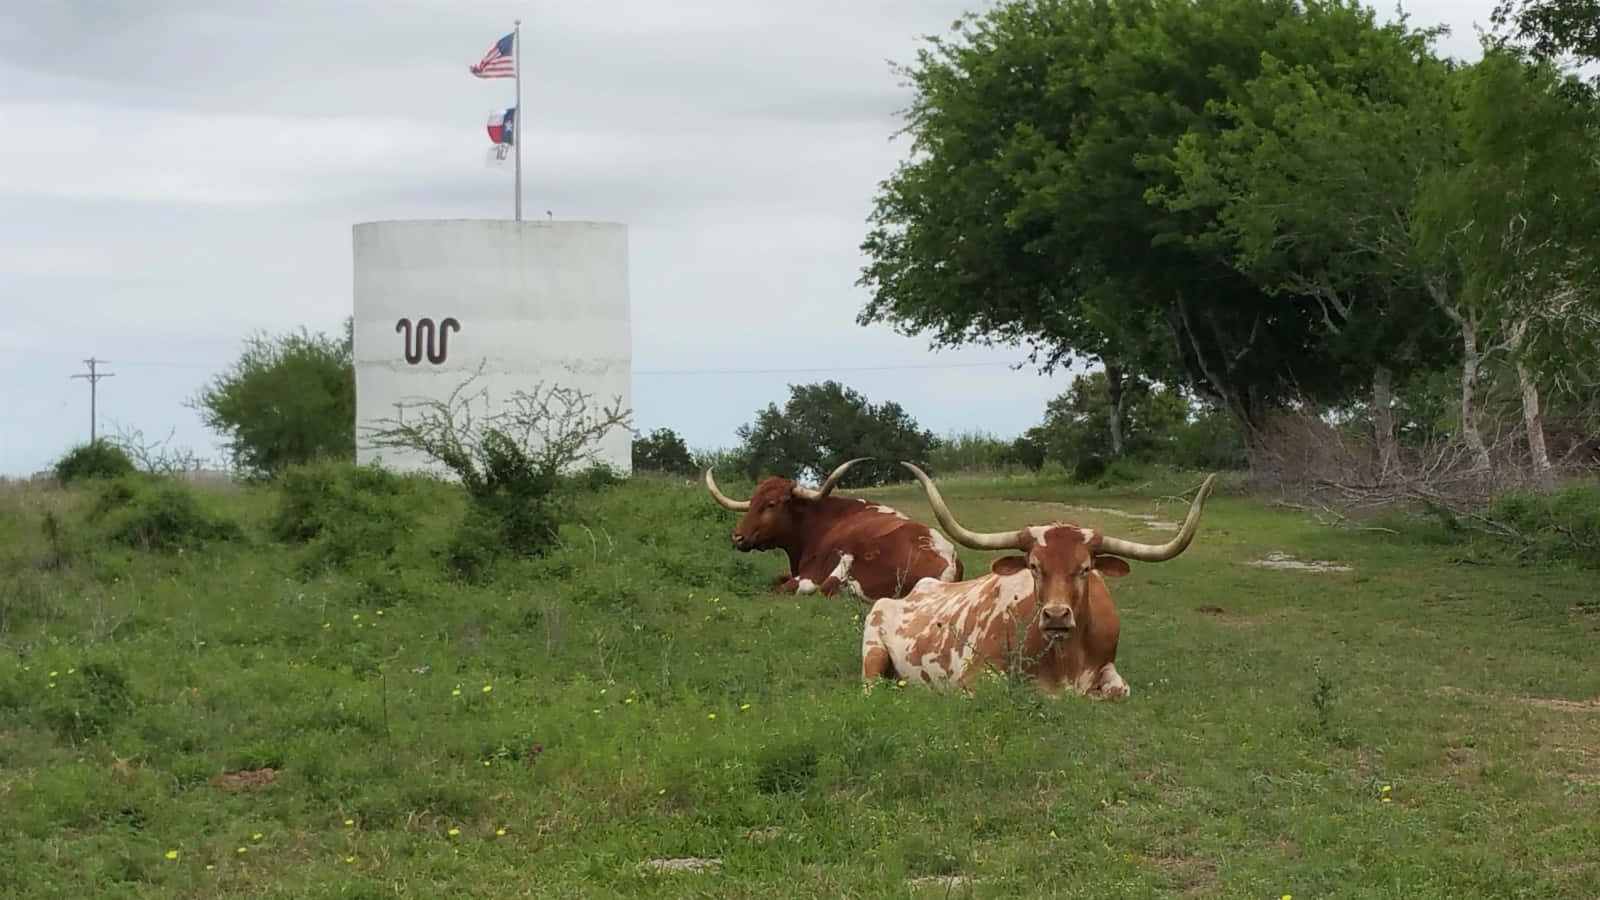 King Ranch - An Iconic Landscape in South Texas